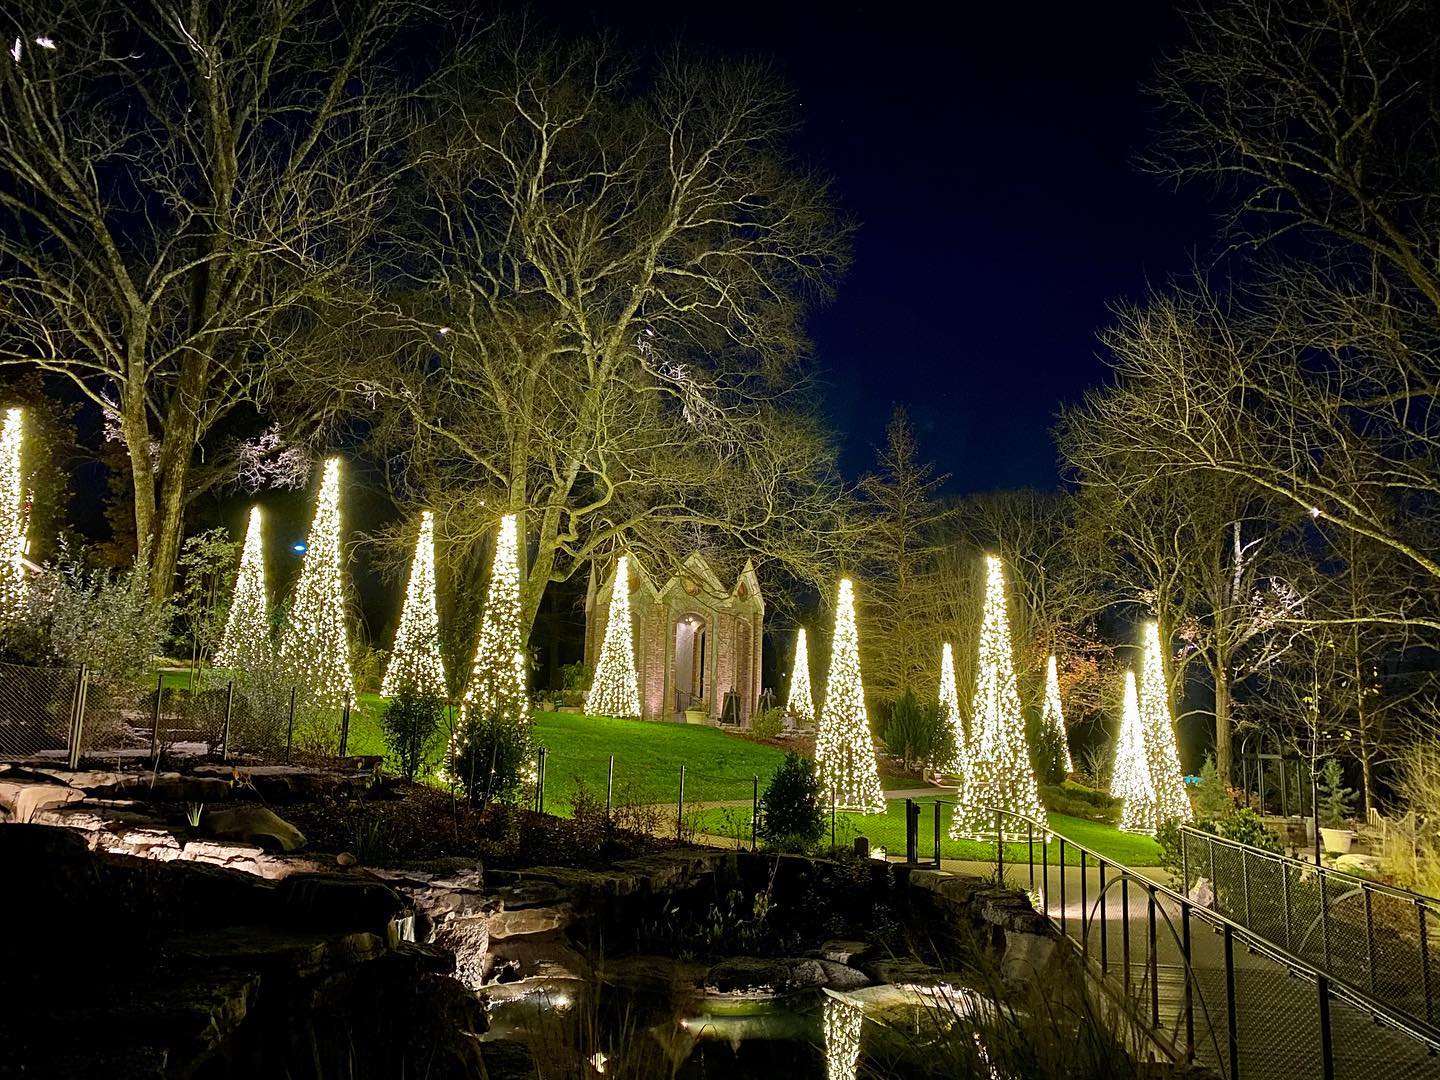 holiday lights and trees at cheekwood estates and gardens during winter in nashville tn 